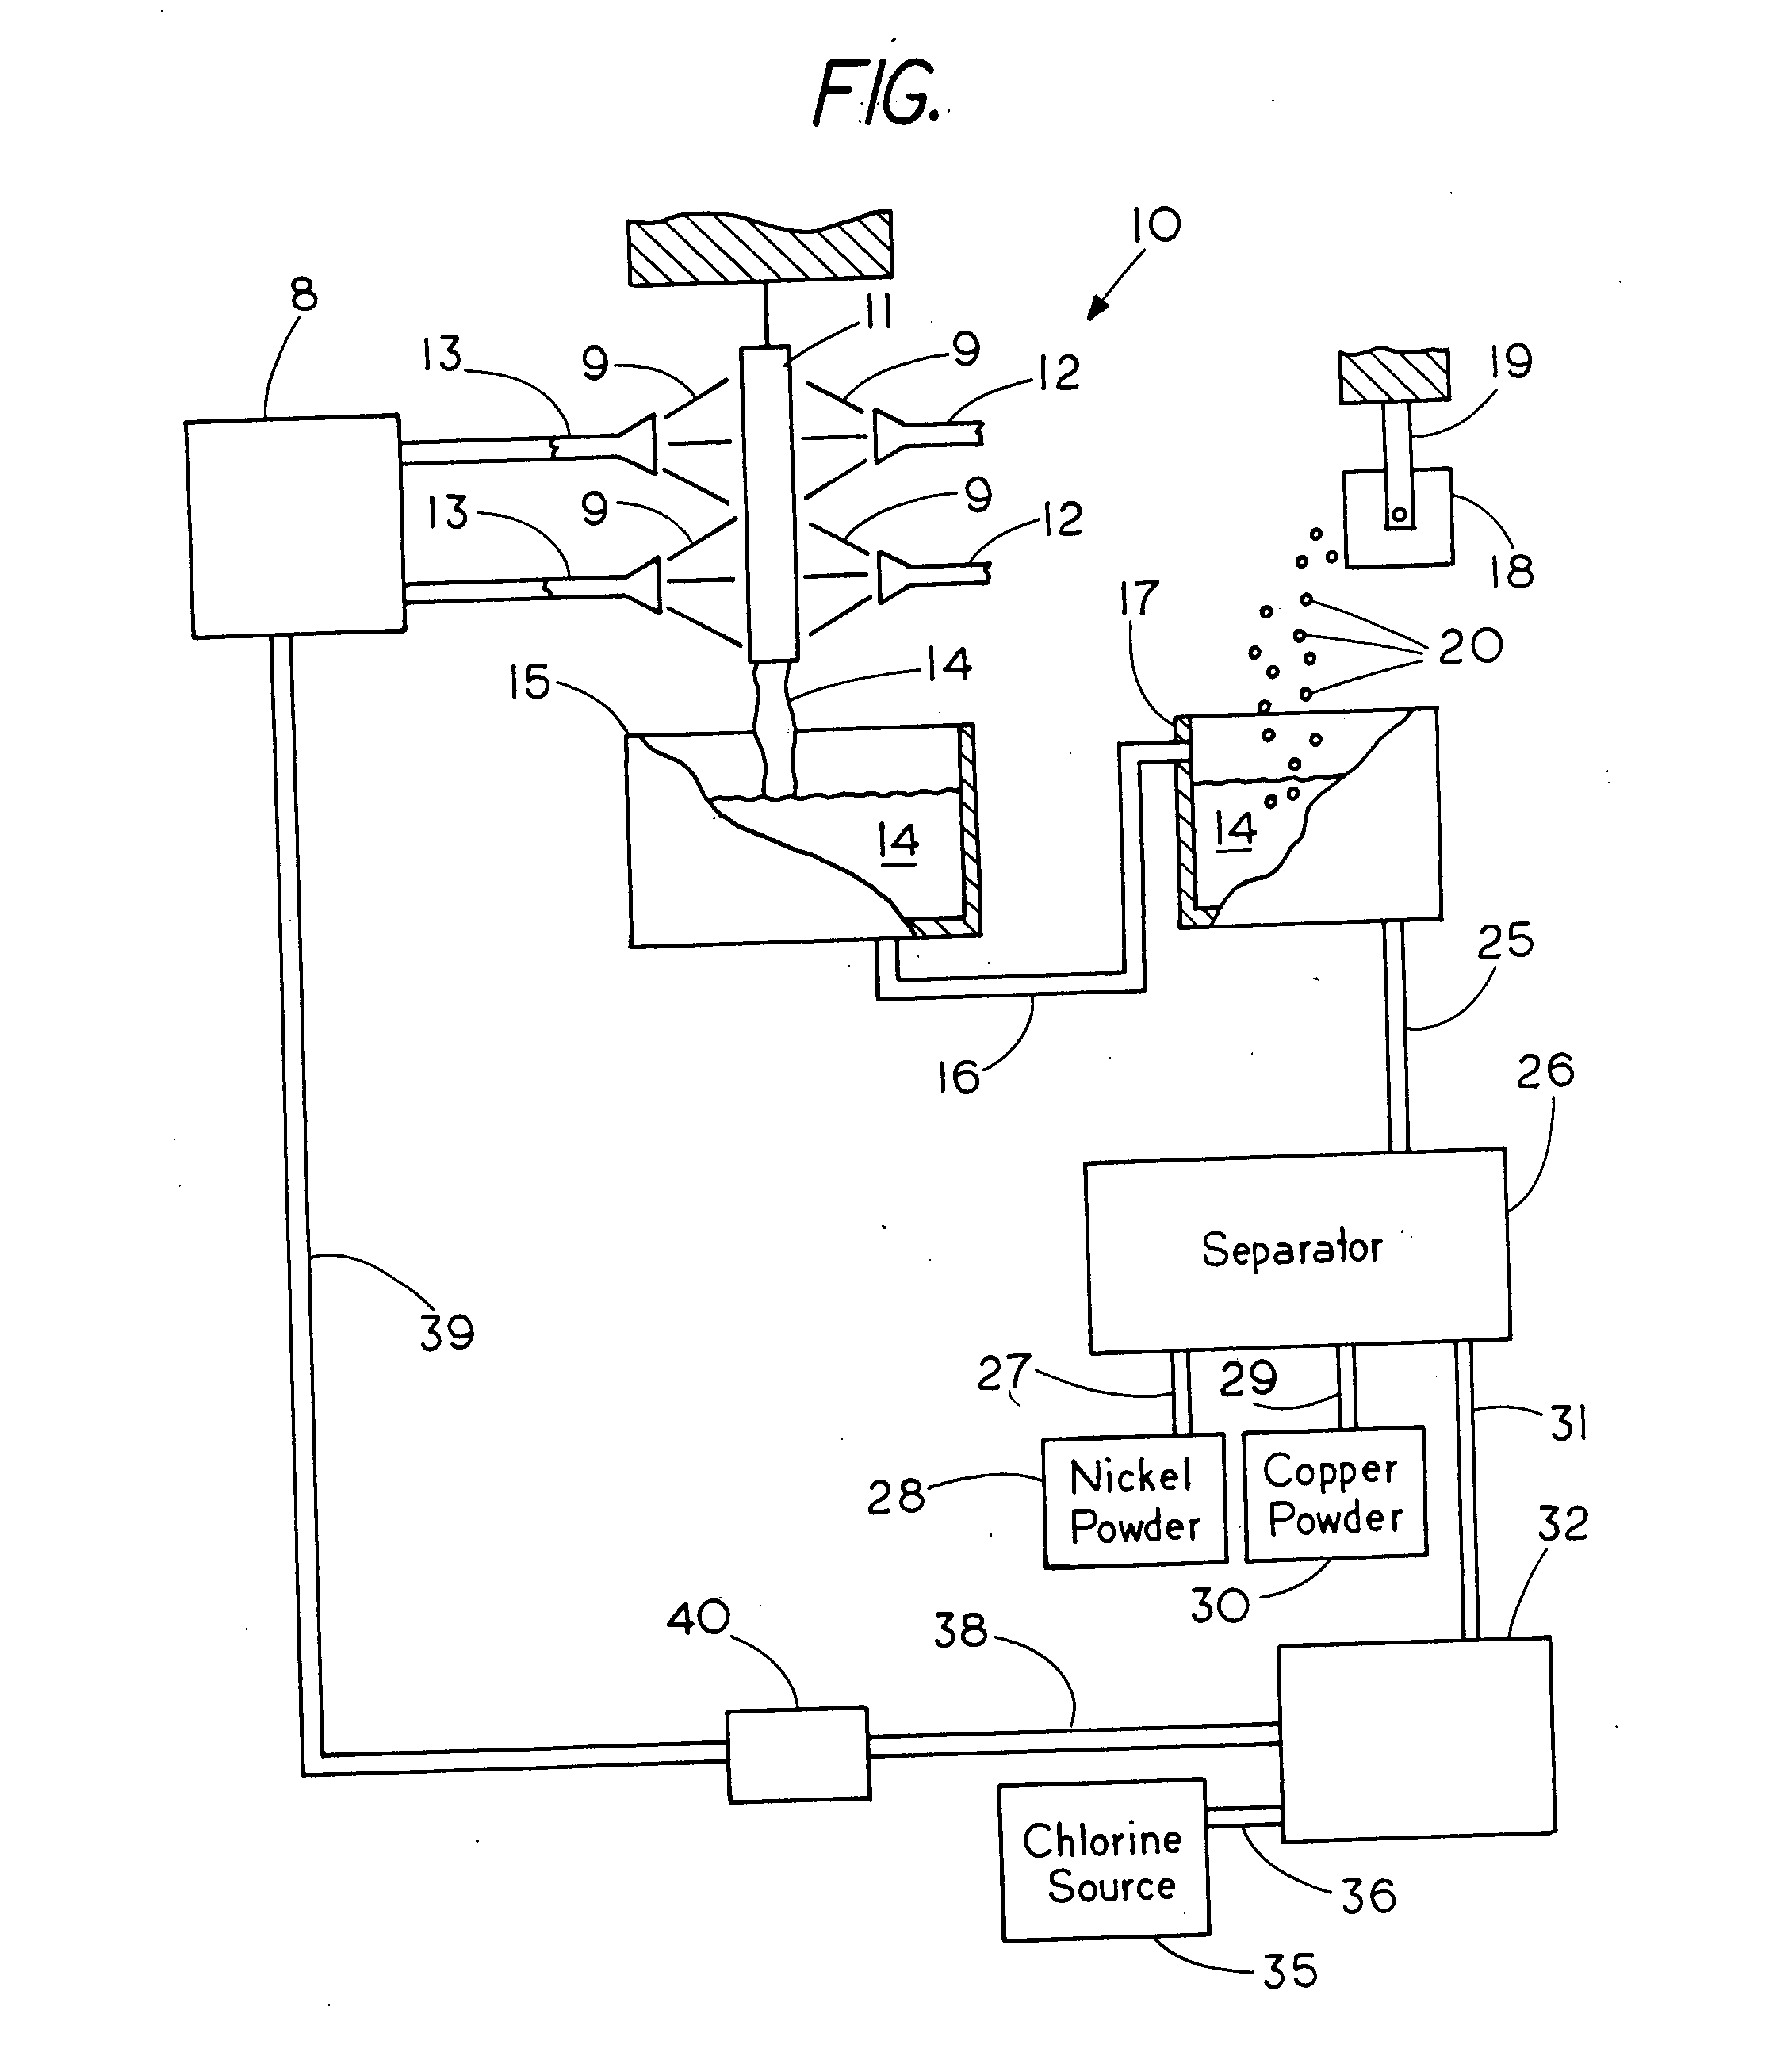 Method of recovery of metals from etching solutions